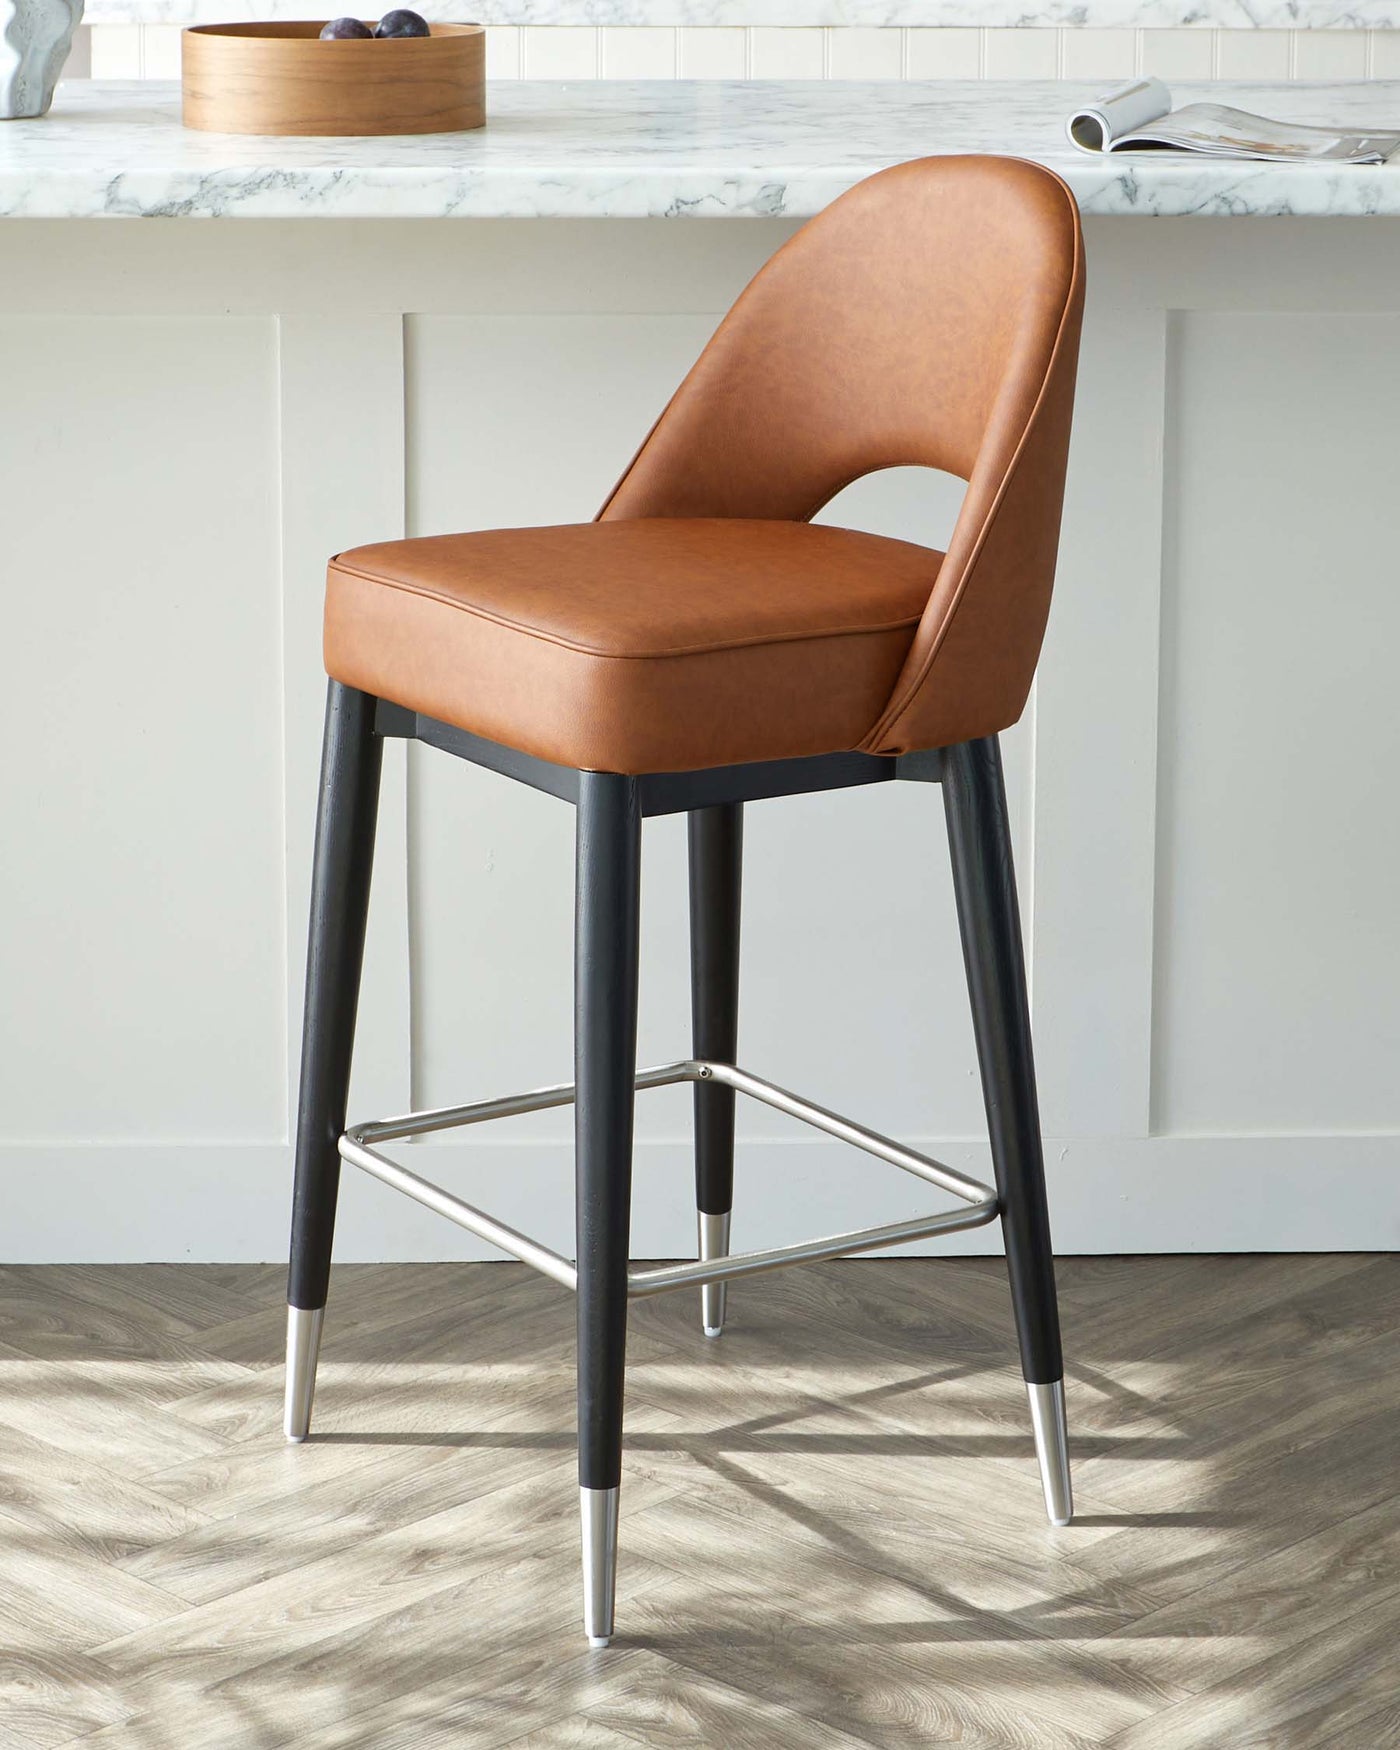 Modern bar stool with a caramel brown upholstered seat and curved backrest, mounted on a black metal frame with sleek metallic accents on the legs and a footrest for added comfort. The stool is positioned on a herringbone wood floor next to a kitchen counter with a marble top.